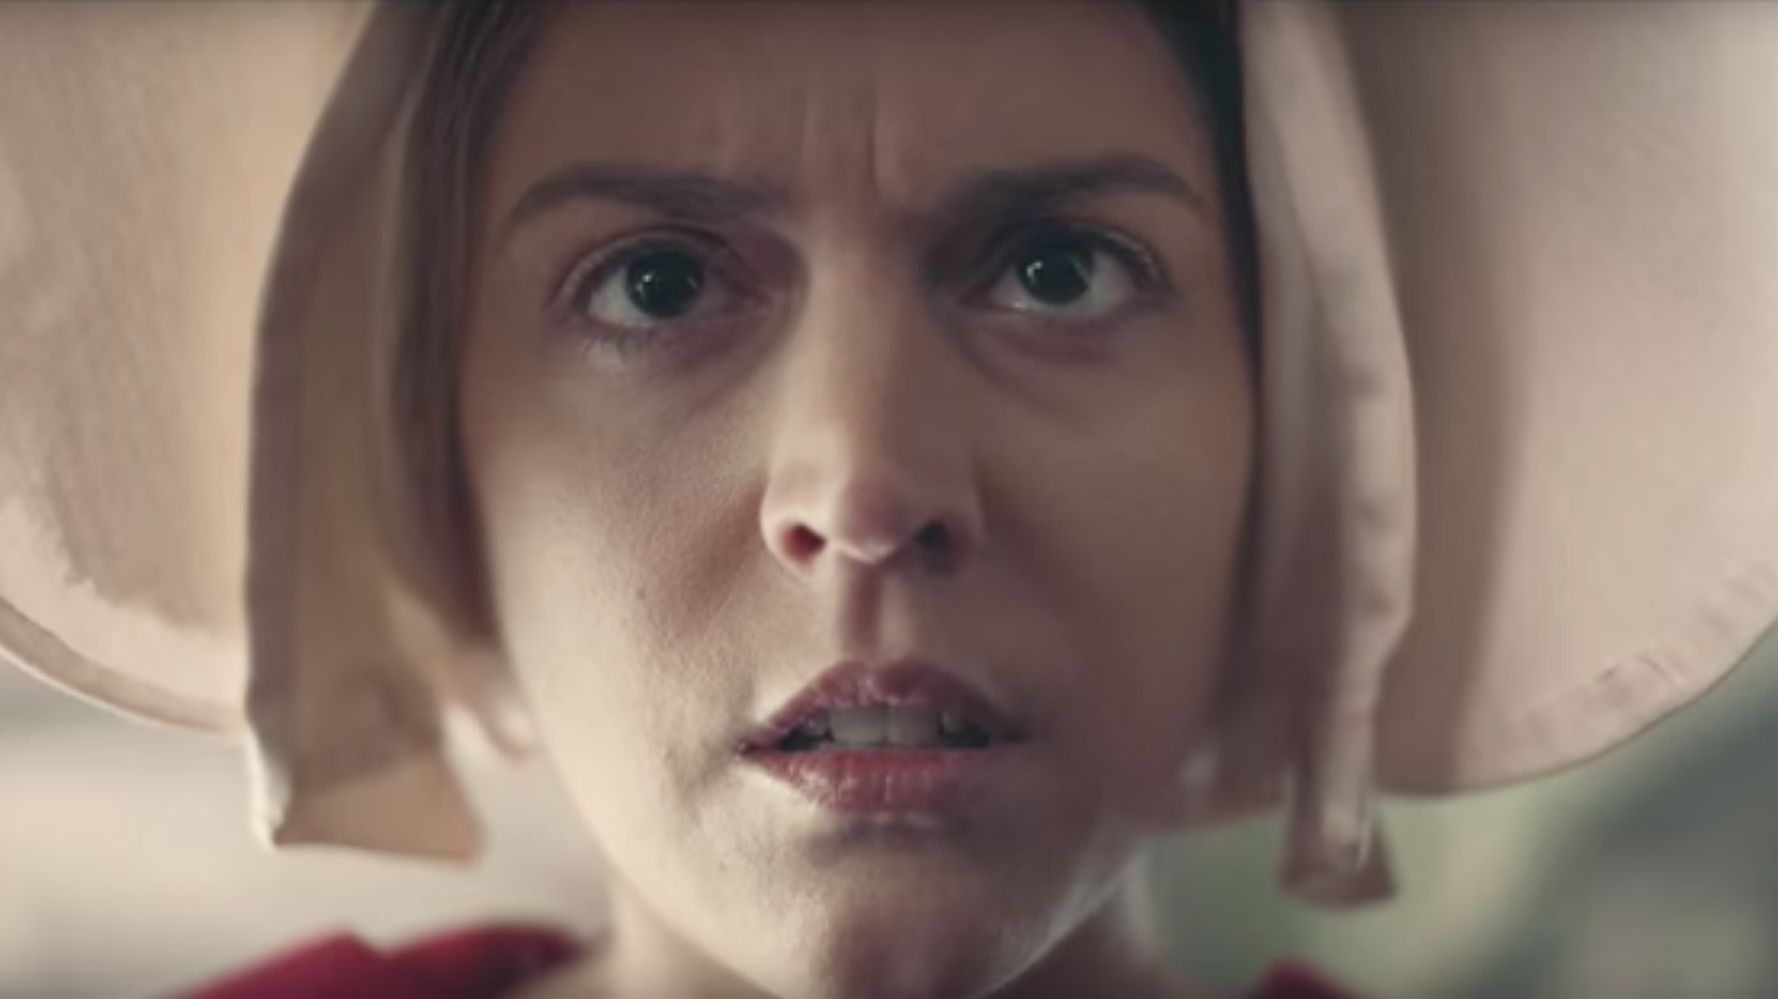 Watching This Snl Handmaids Tale Skit Is Kind Of A Bummer Huffpost 